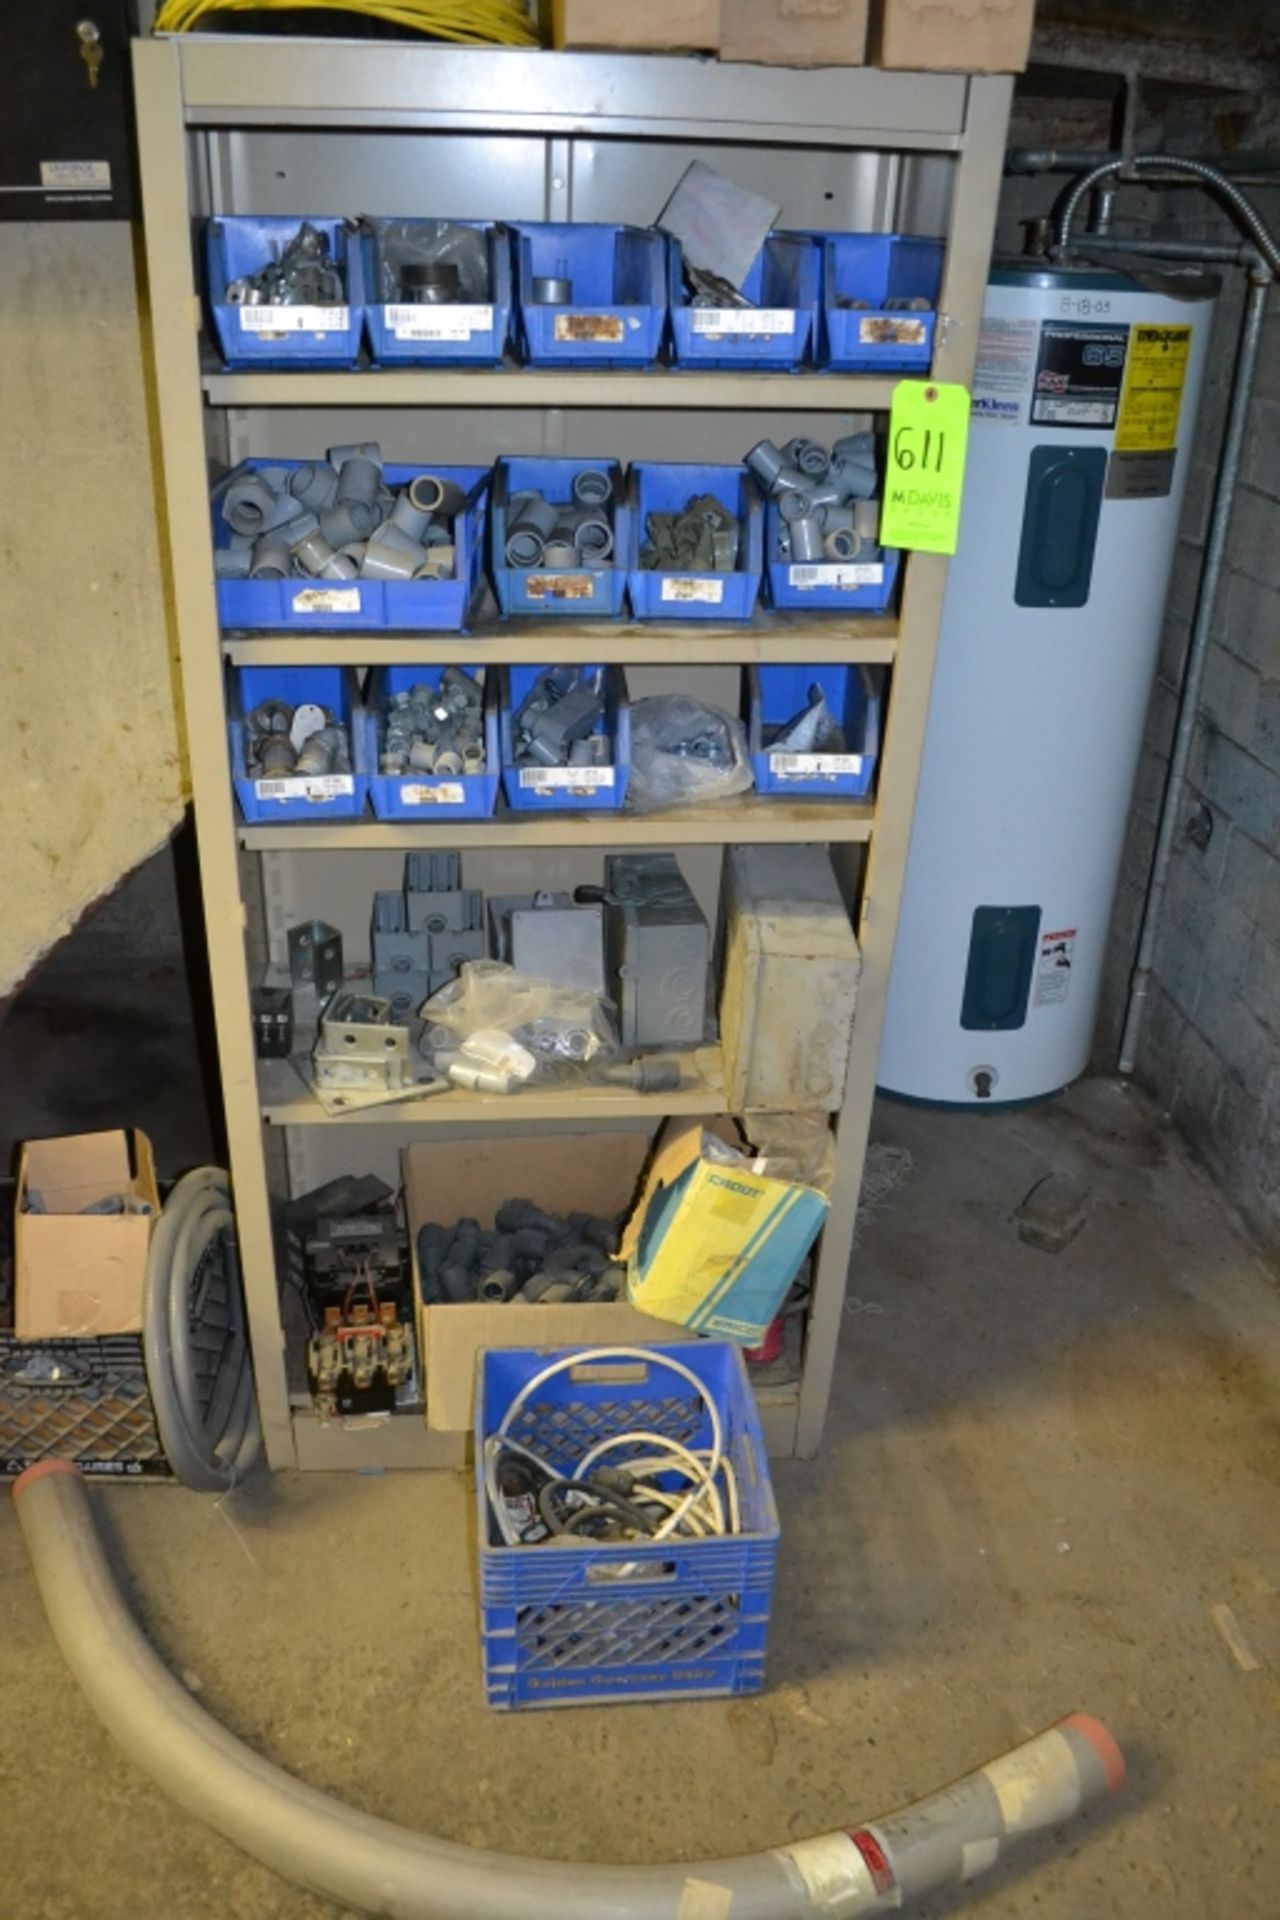 Shelf and Contents Including Large Conduit Elbow, and (10) Plus Bins of Electrical Conduit